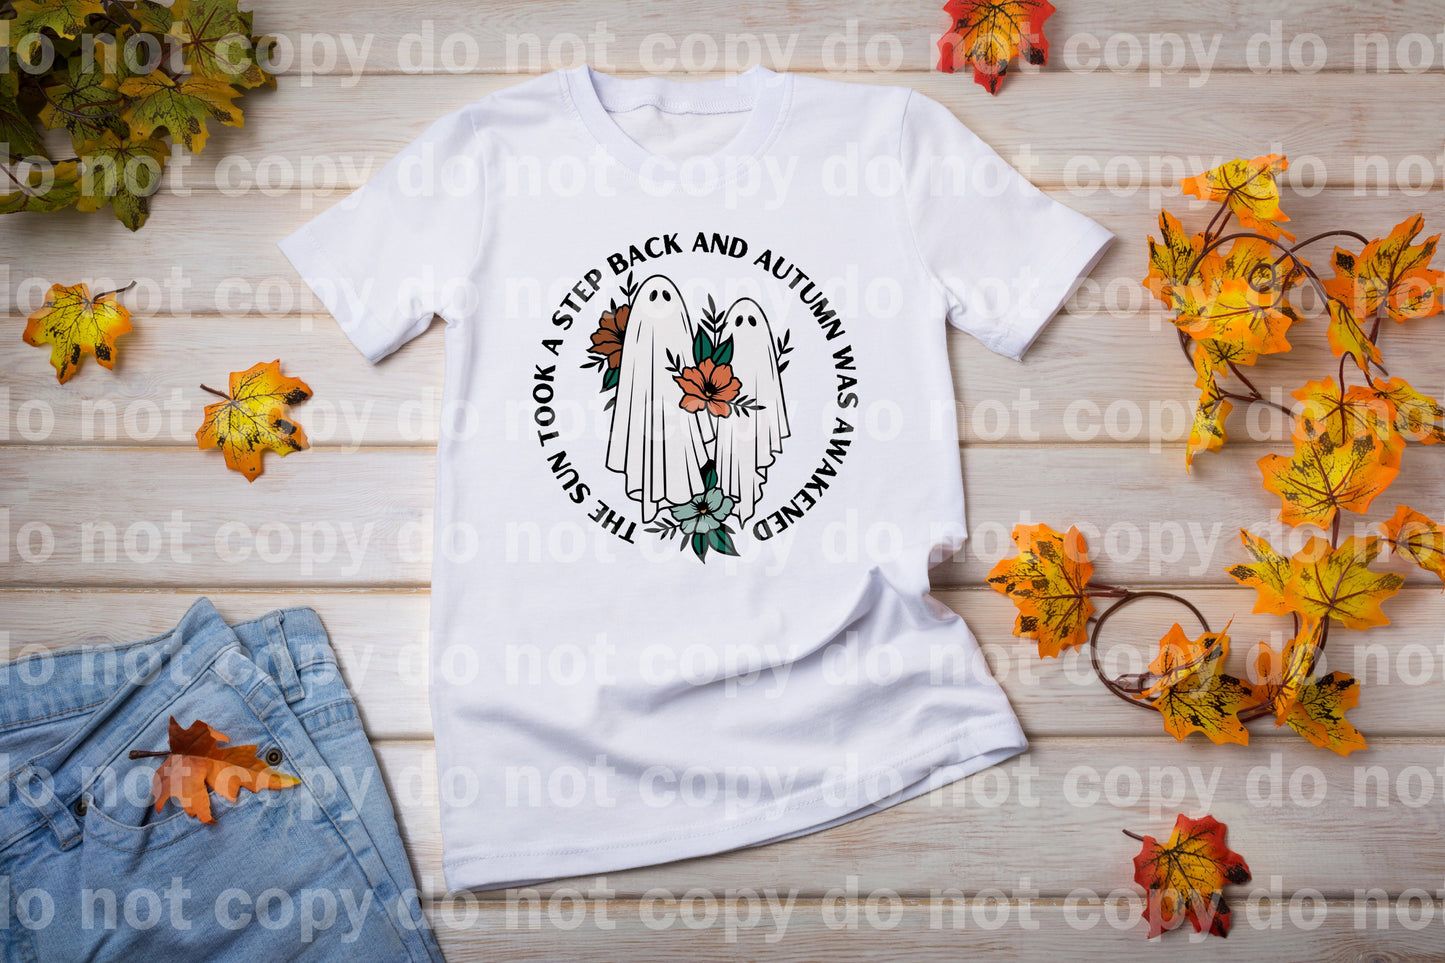 The Sun Took a Step Back and Autumn Was Awakened Dream Print or Sublimation Print